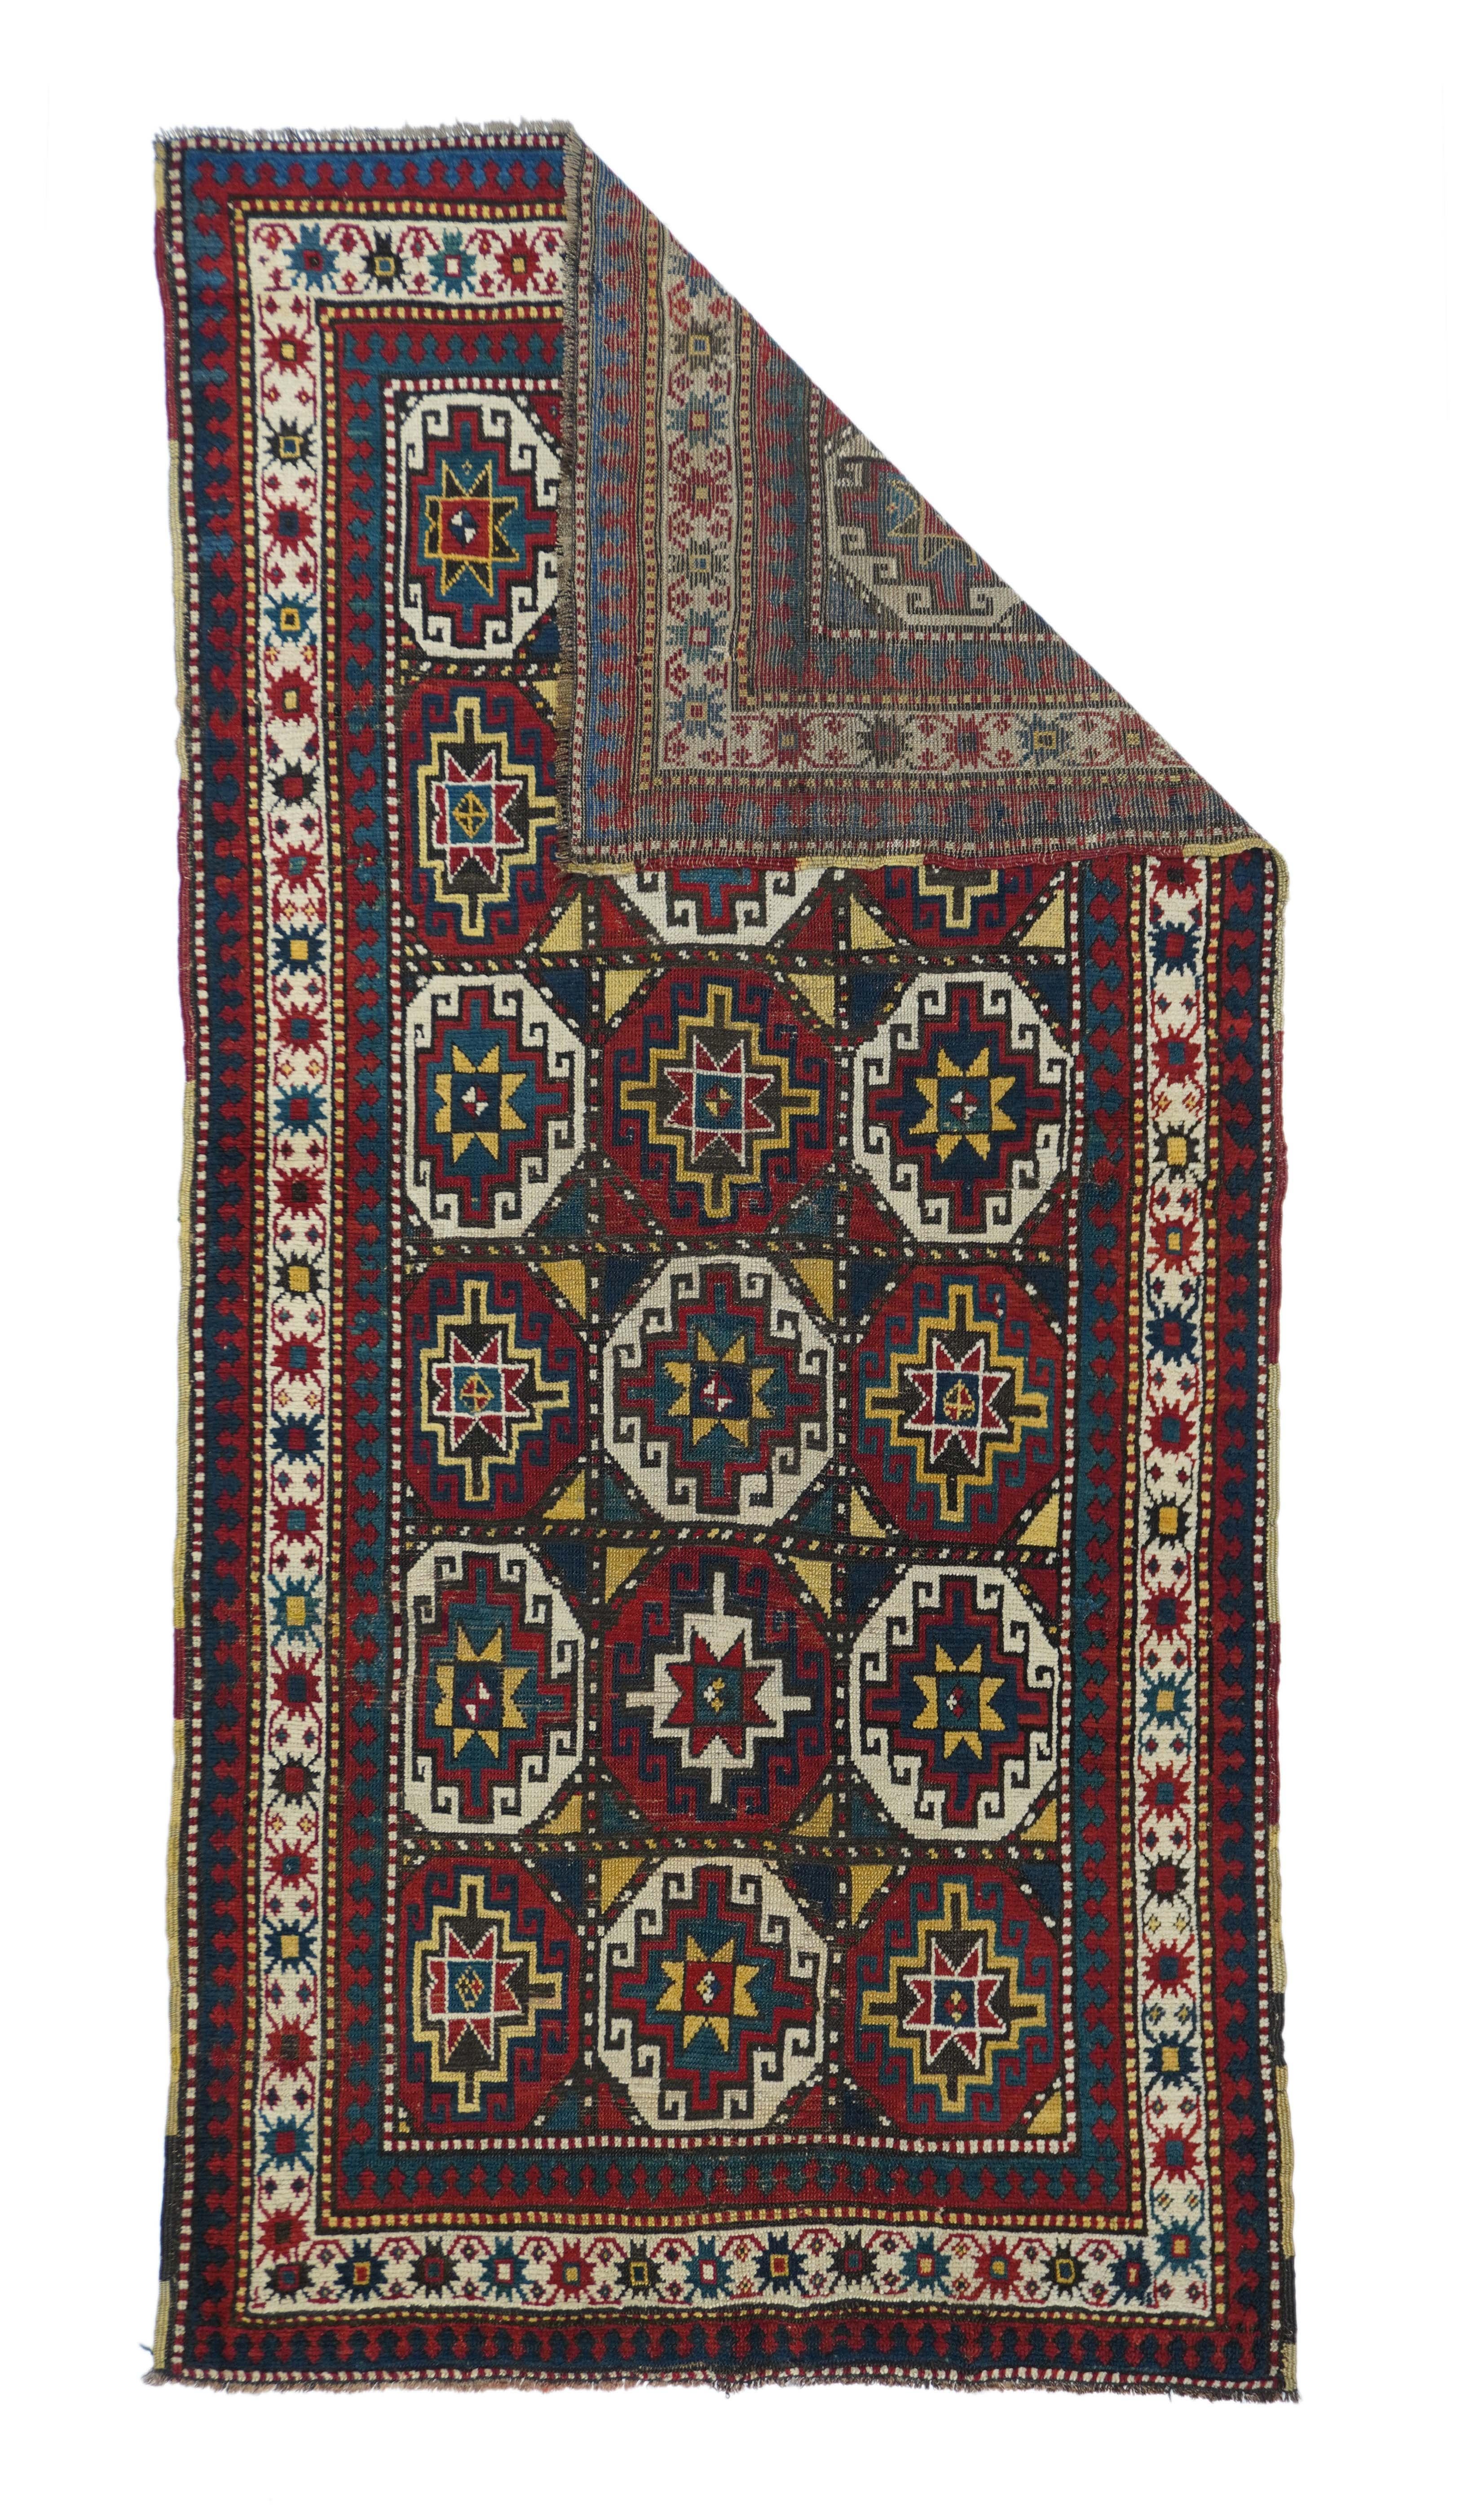 Antique Kazak rug measures: 4' x 7'8''. Three more or less complete columns of seven boxed 'Memling guls